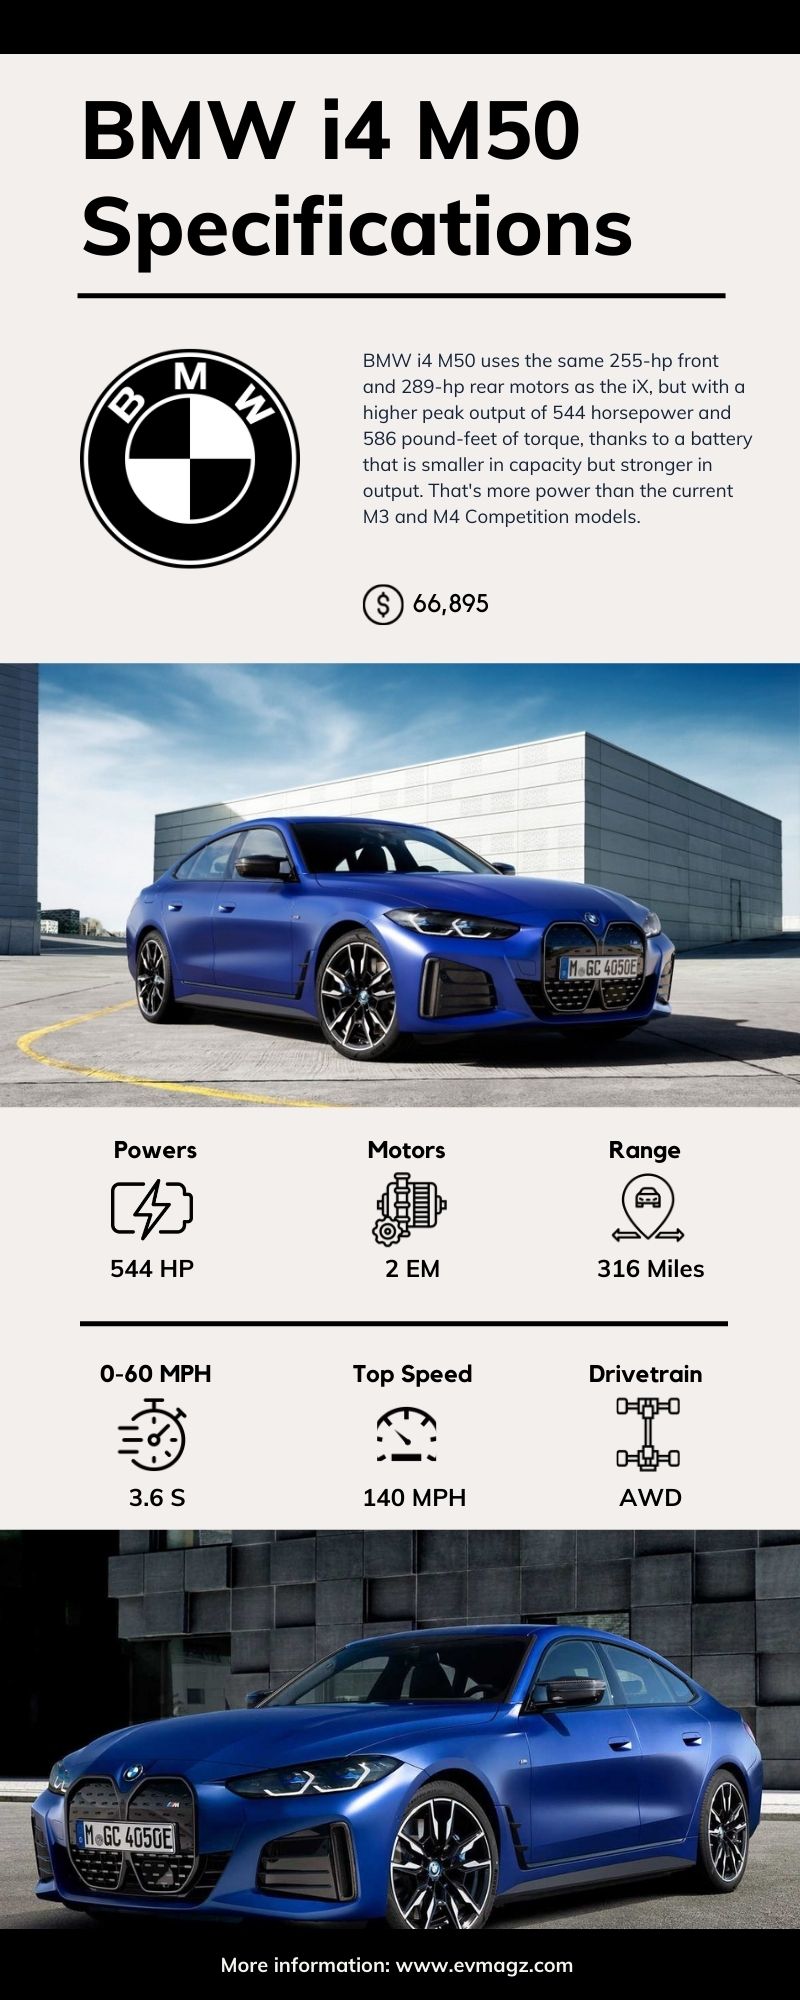 BMW i4 M50 Specifications Infographic